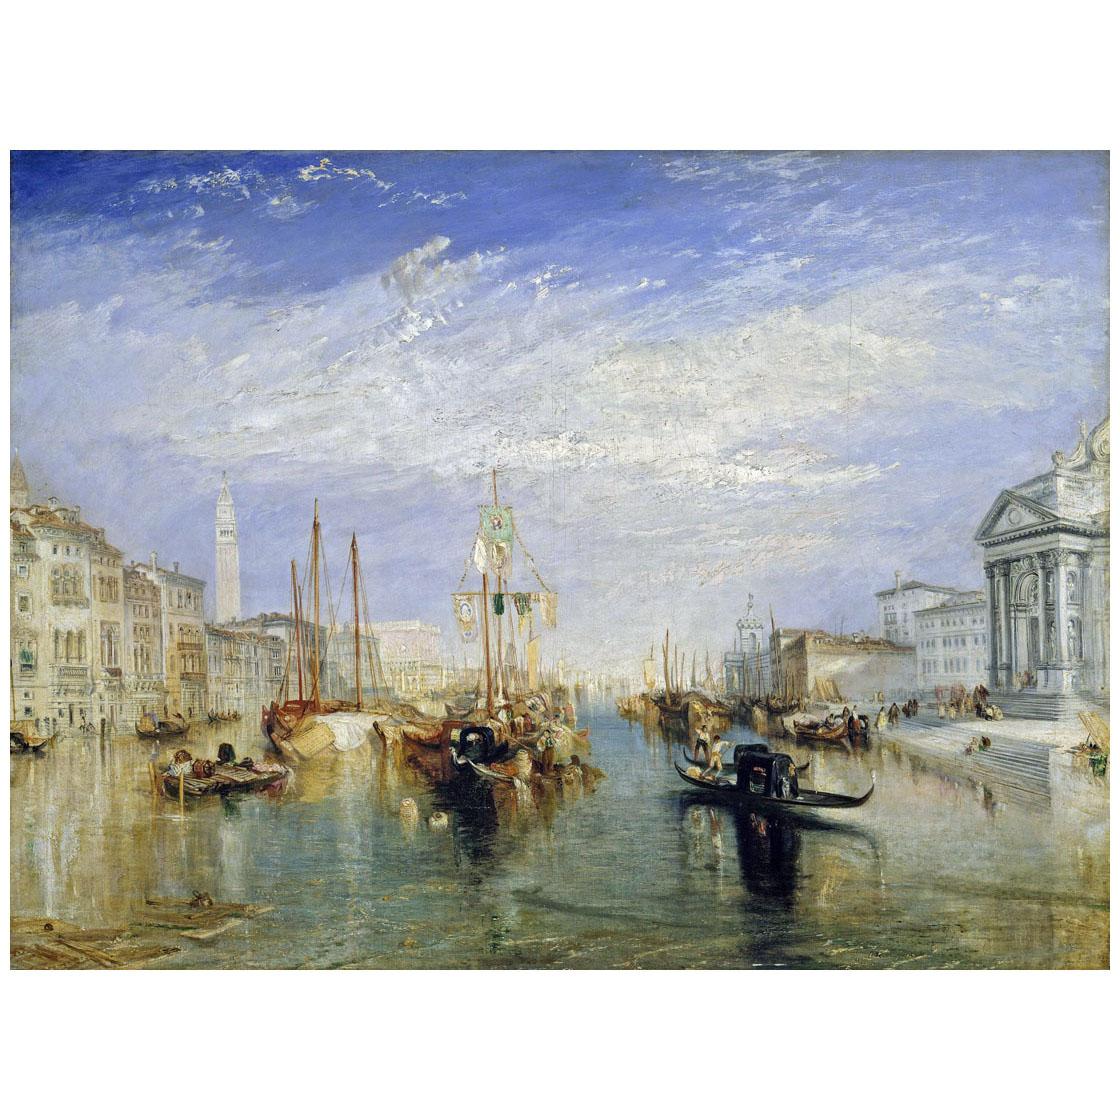 William Turner. The Grand Canal. 1835. Metropolitan Museum NY